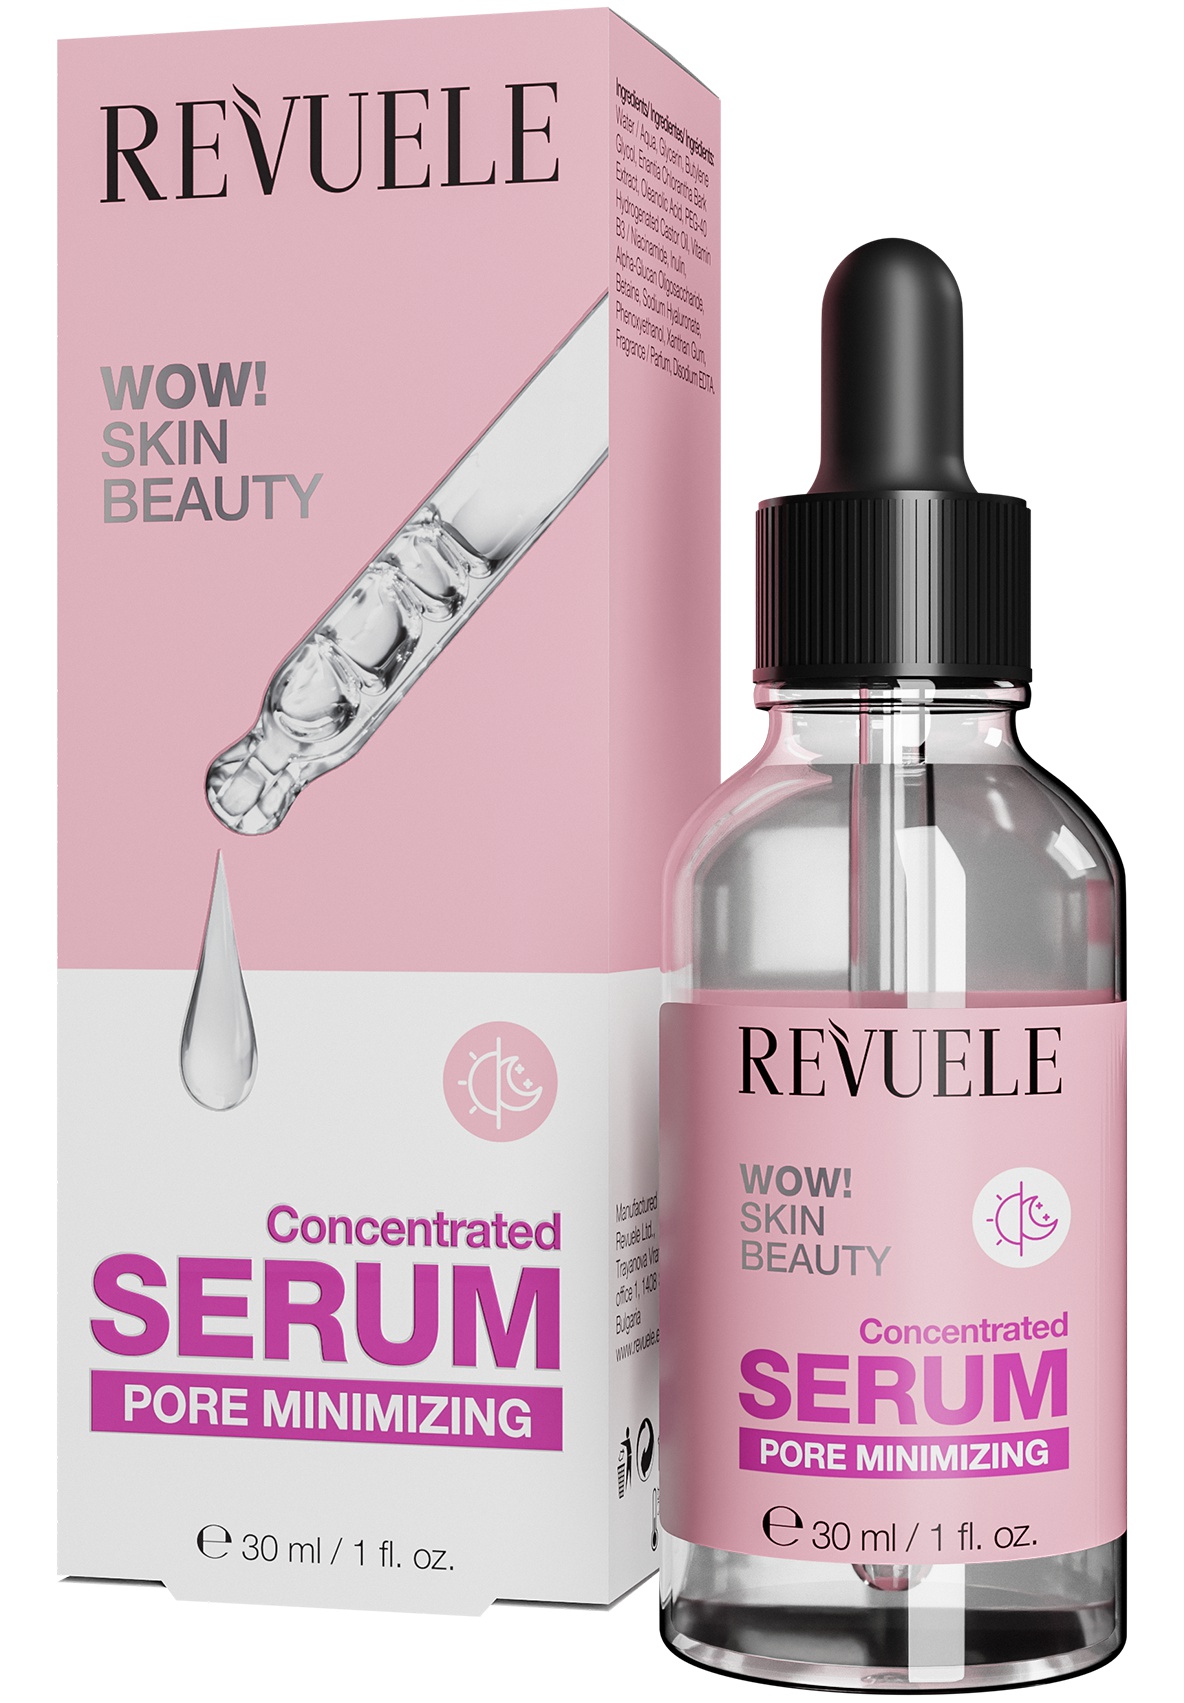 Revuele Wow! Skin Beauty Concentrated Serum Pore Minimizing